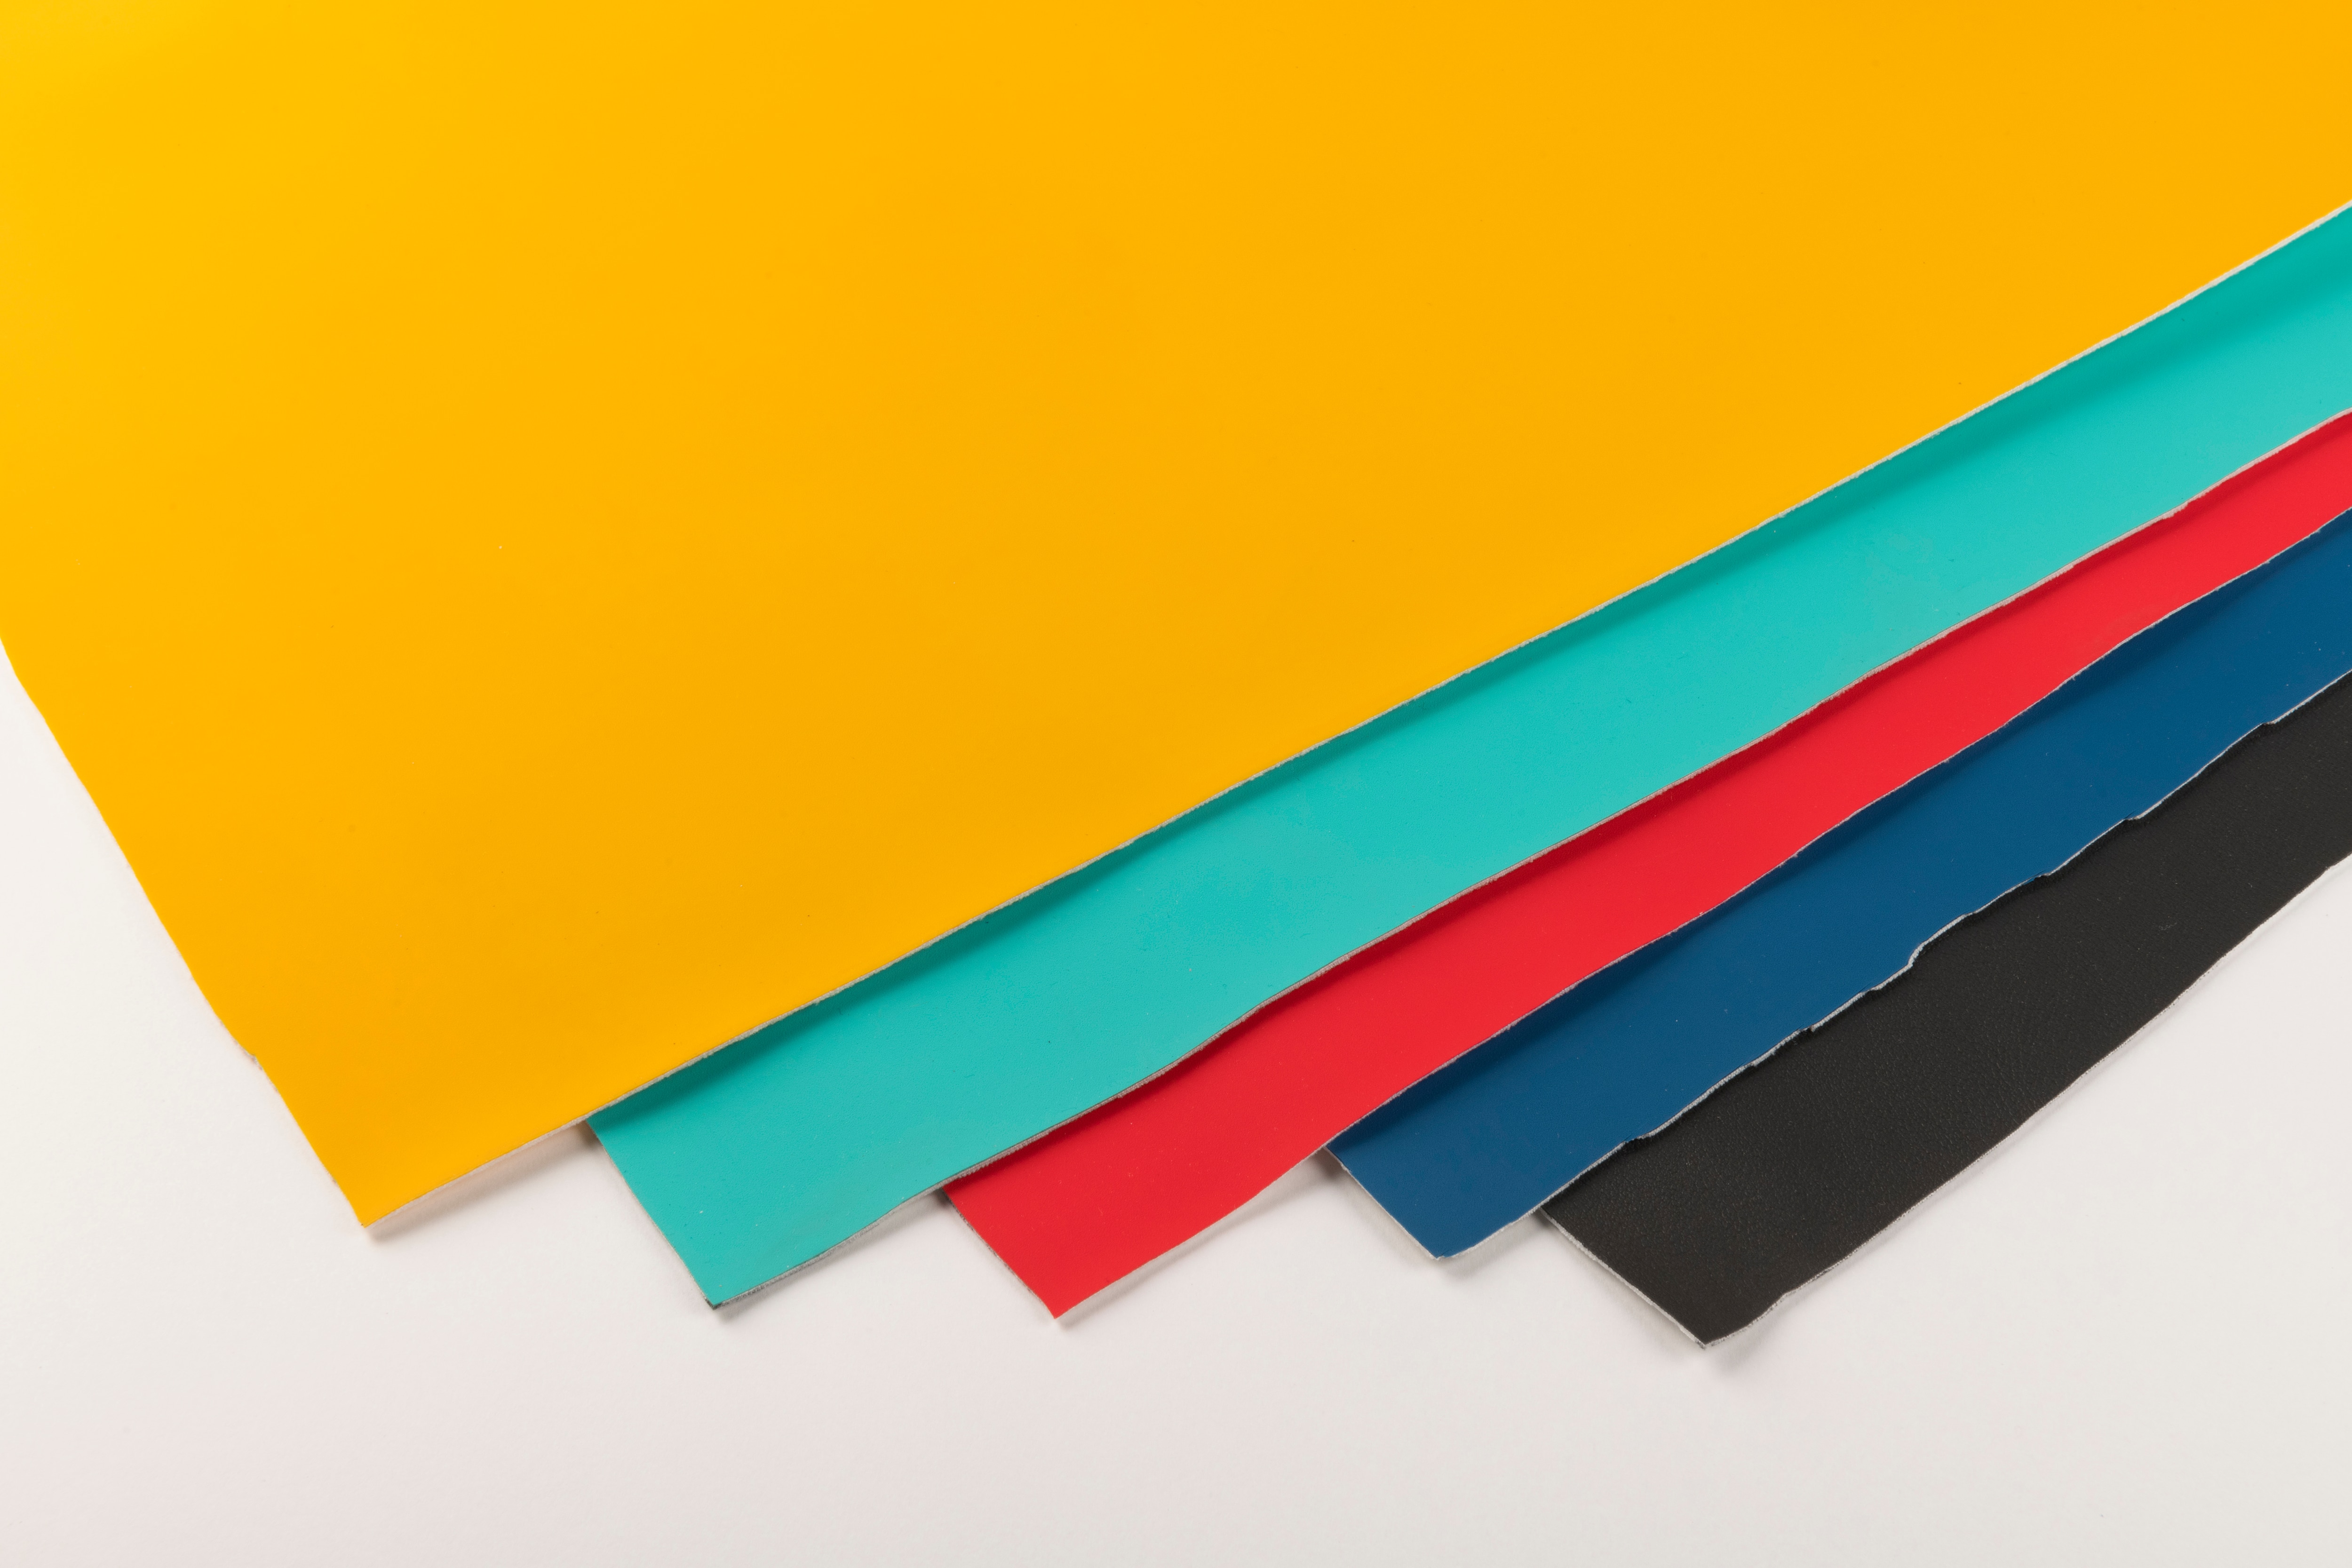 5 swatches of synthetic leather in yellow, teal, red, dark blue and black 